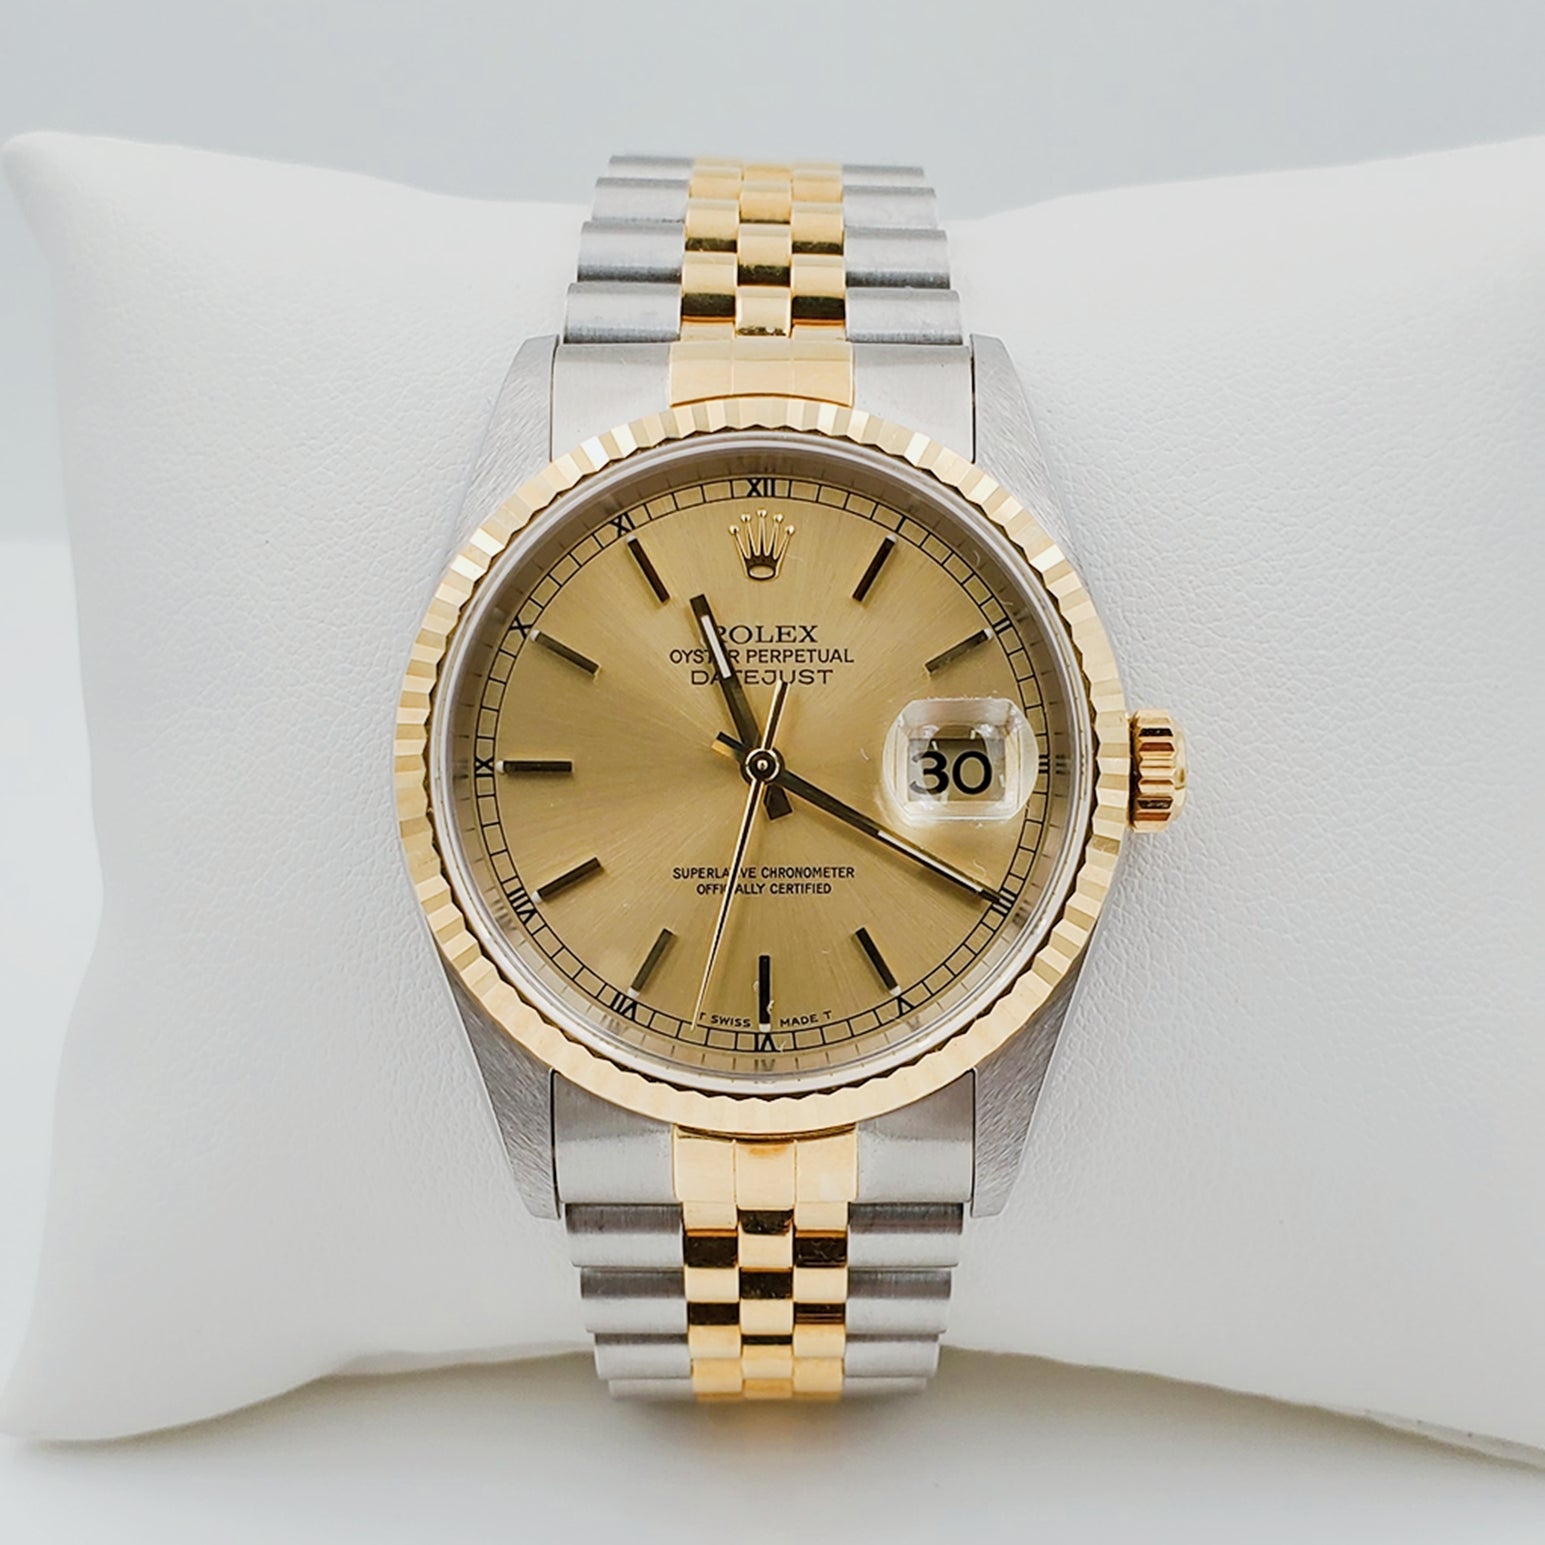 *1998 Men's Rolex 36mm DateJust 18K Gold / Stainless Steel Two Tone Watch with Fluted Bezel and Champaign Dial. (NEW 16233)